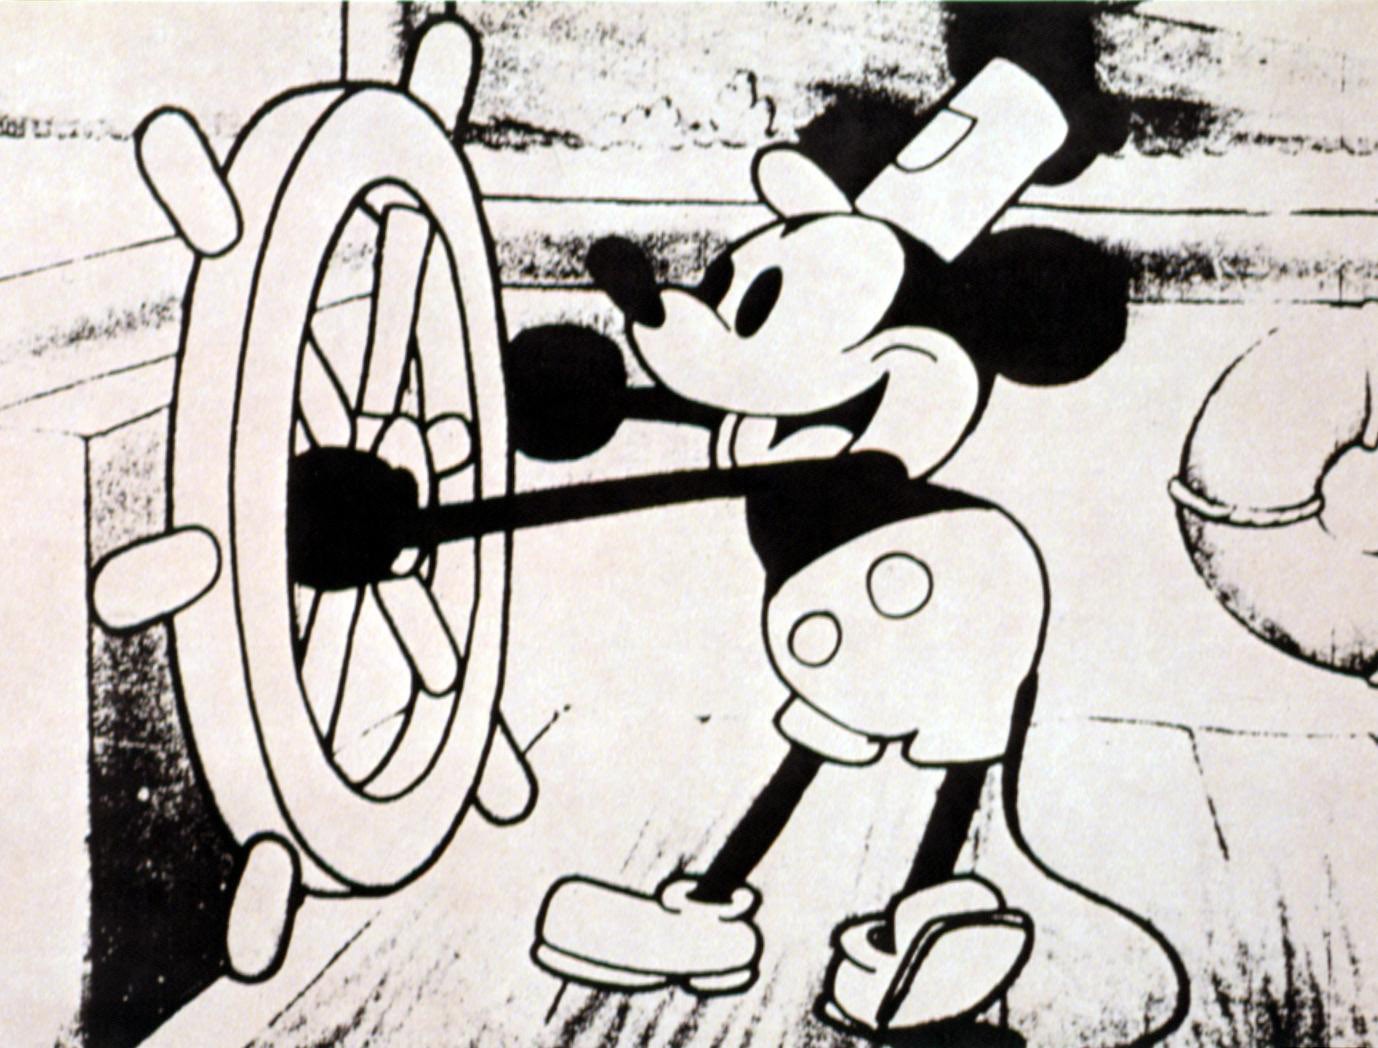 Early Mickey Mouse, just days in the public domain, has already landed roles in 2 very un-Disney-like horror movies